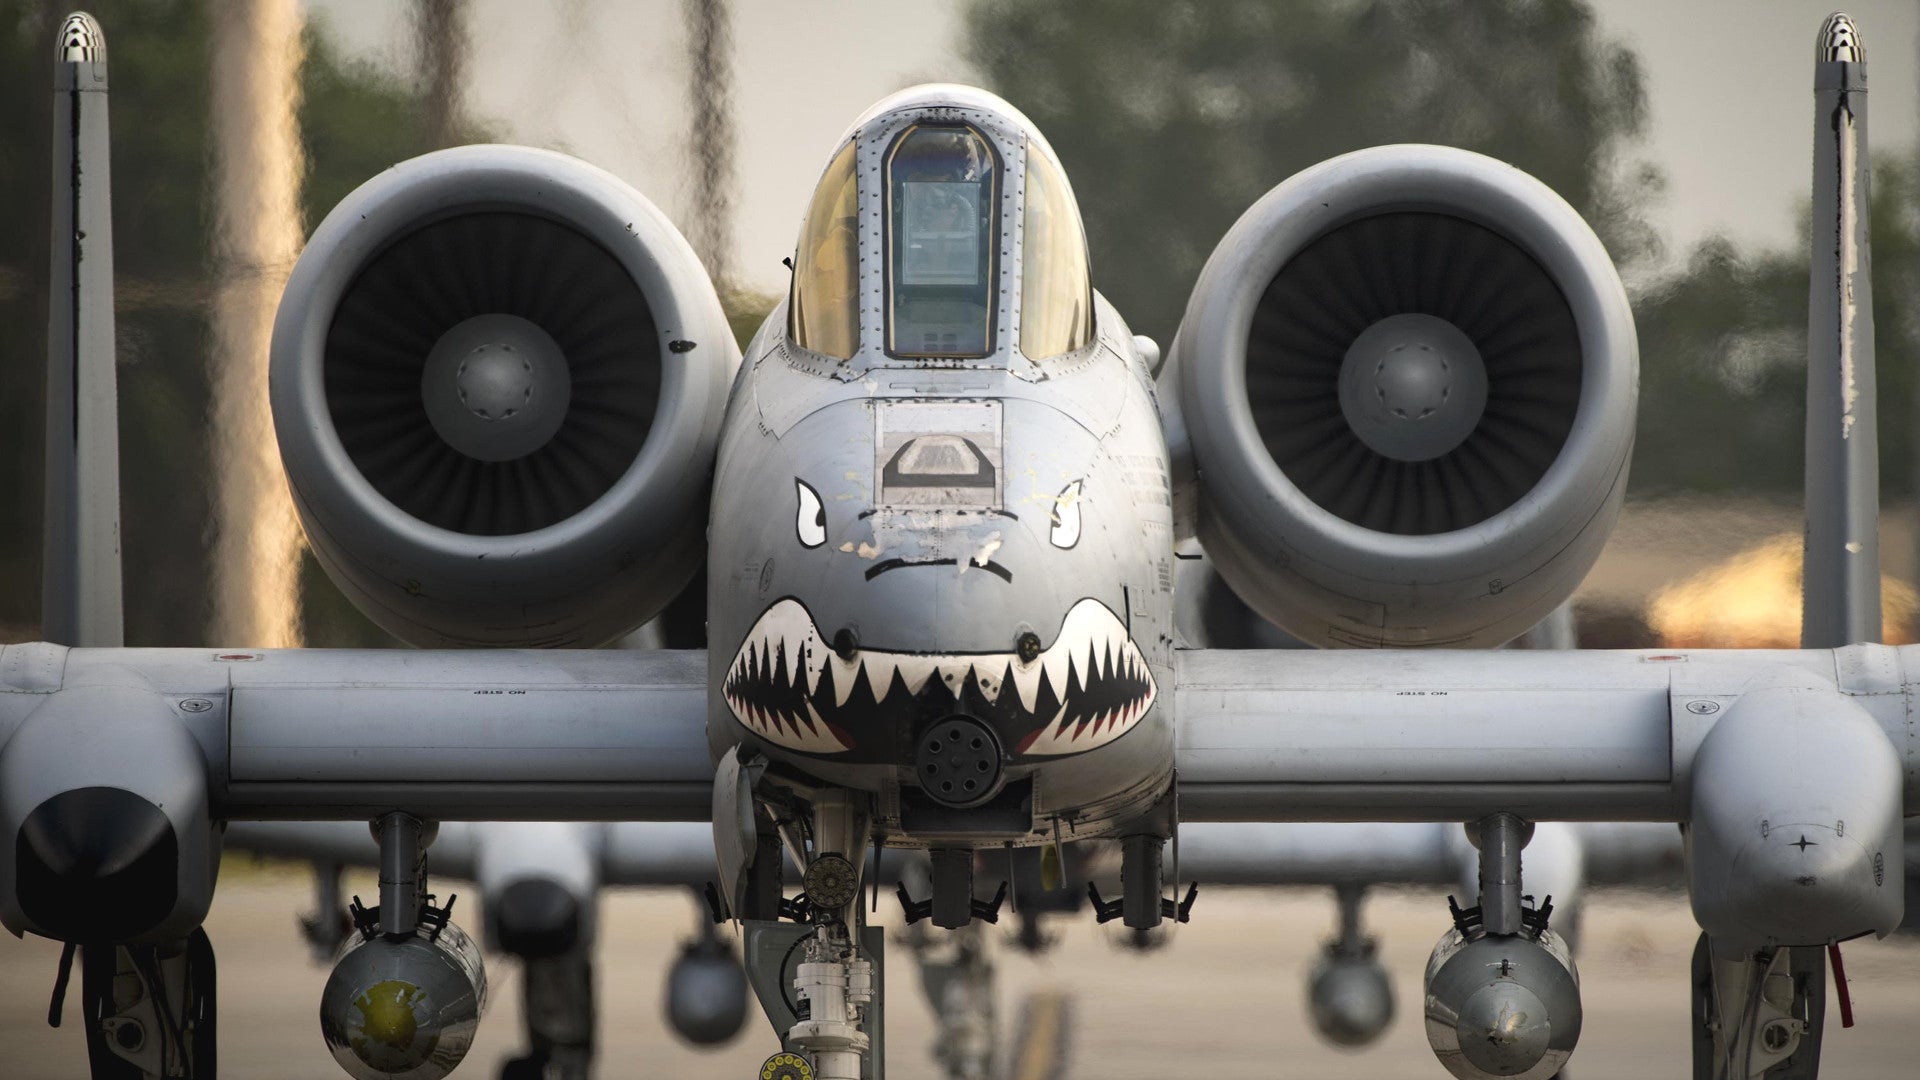 A-10 Replacement Requirements Do Actually Exist But They’re Mired In Bureaucratic Limbo